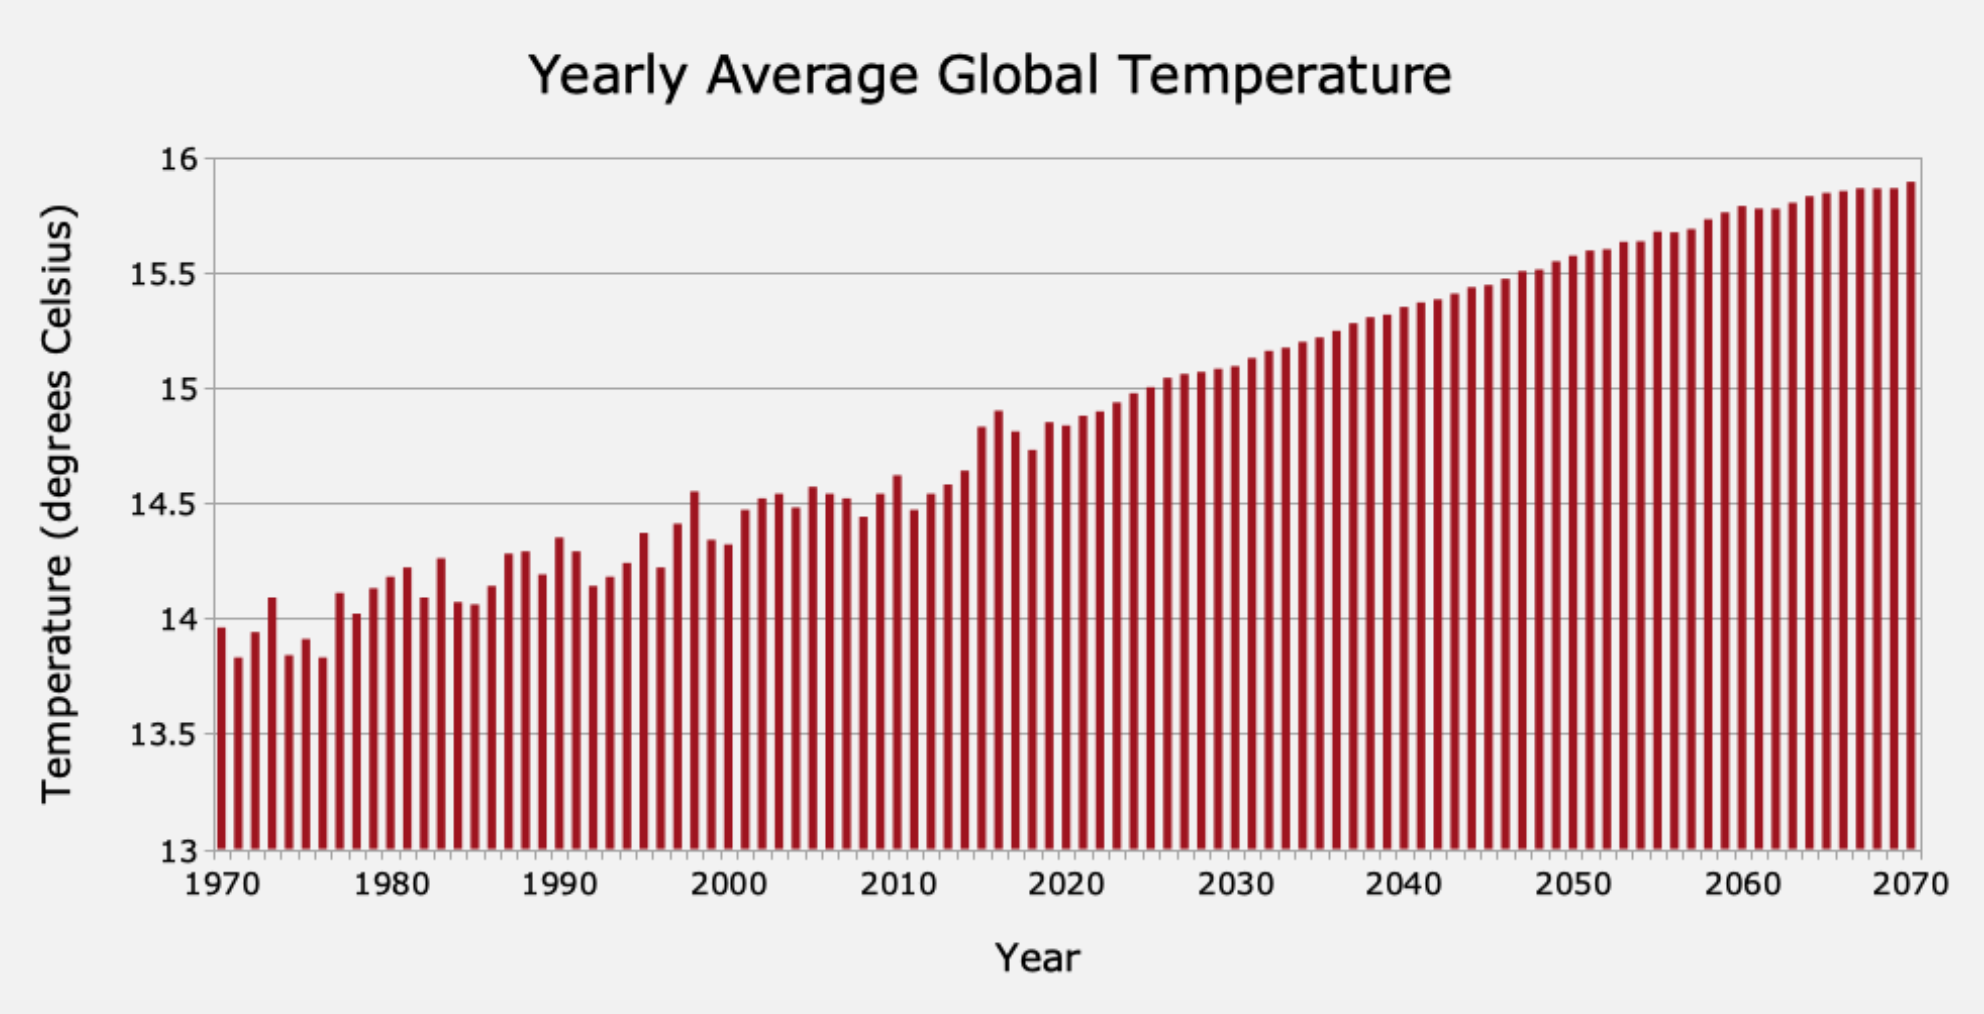 Yearly Average Global Temperatures (1970-2070)